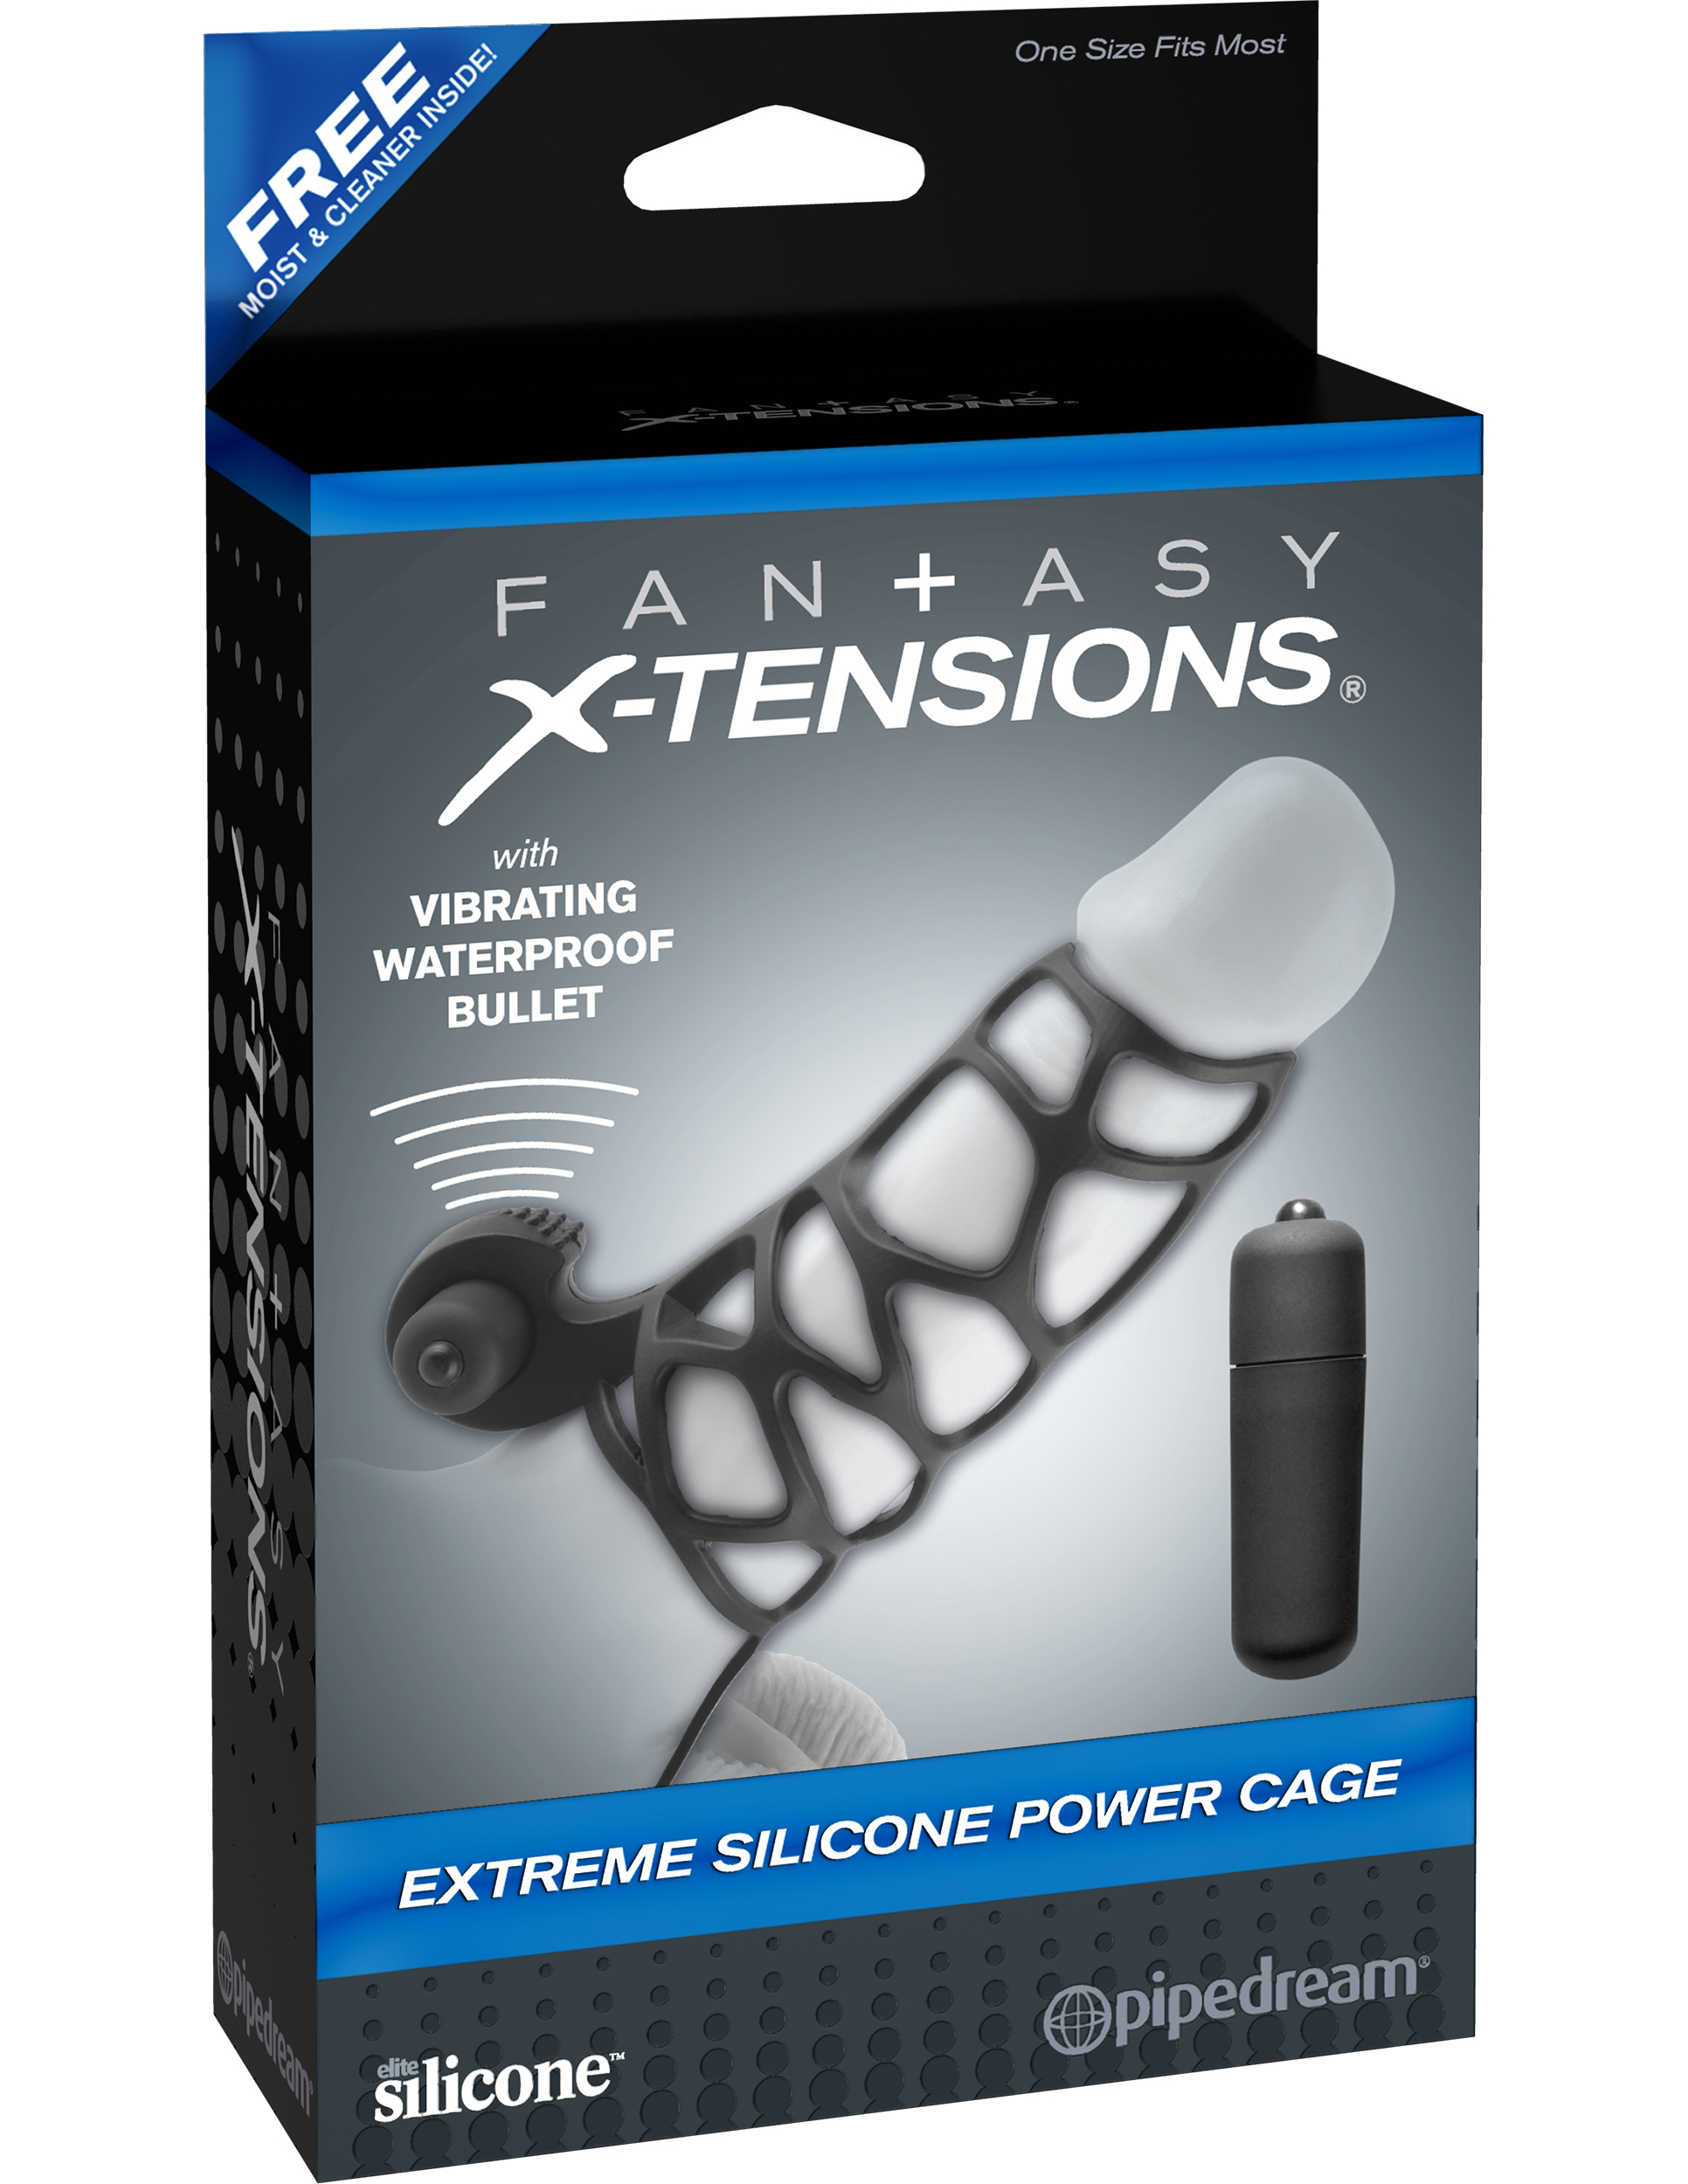 X-Tensions - Extreme Silicone Power Cage